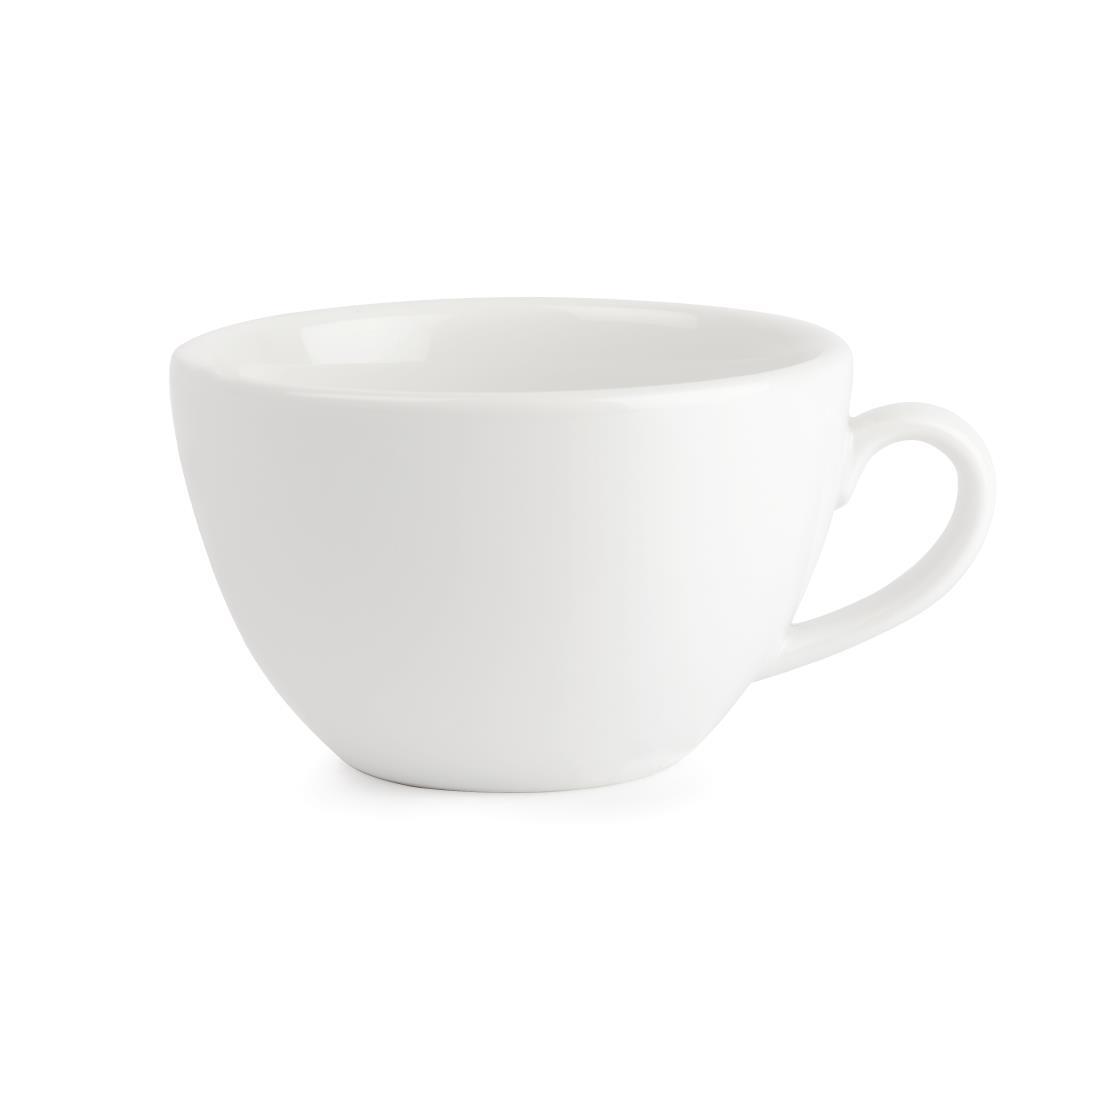 Royal Porcelain Classic White Breakfast Cups 300ml (Pack of 12) - CG022  - 2